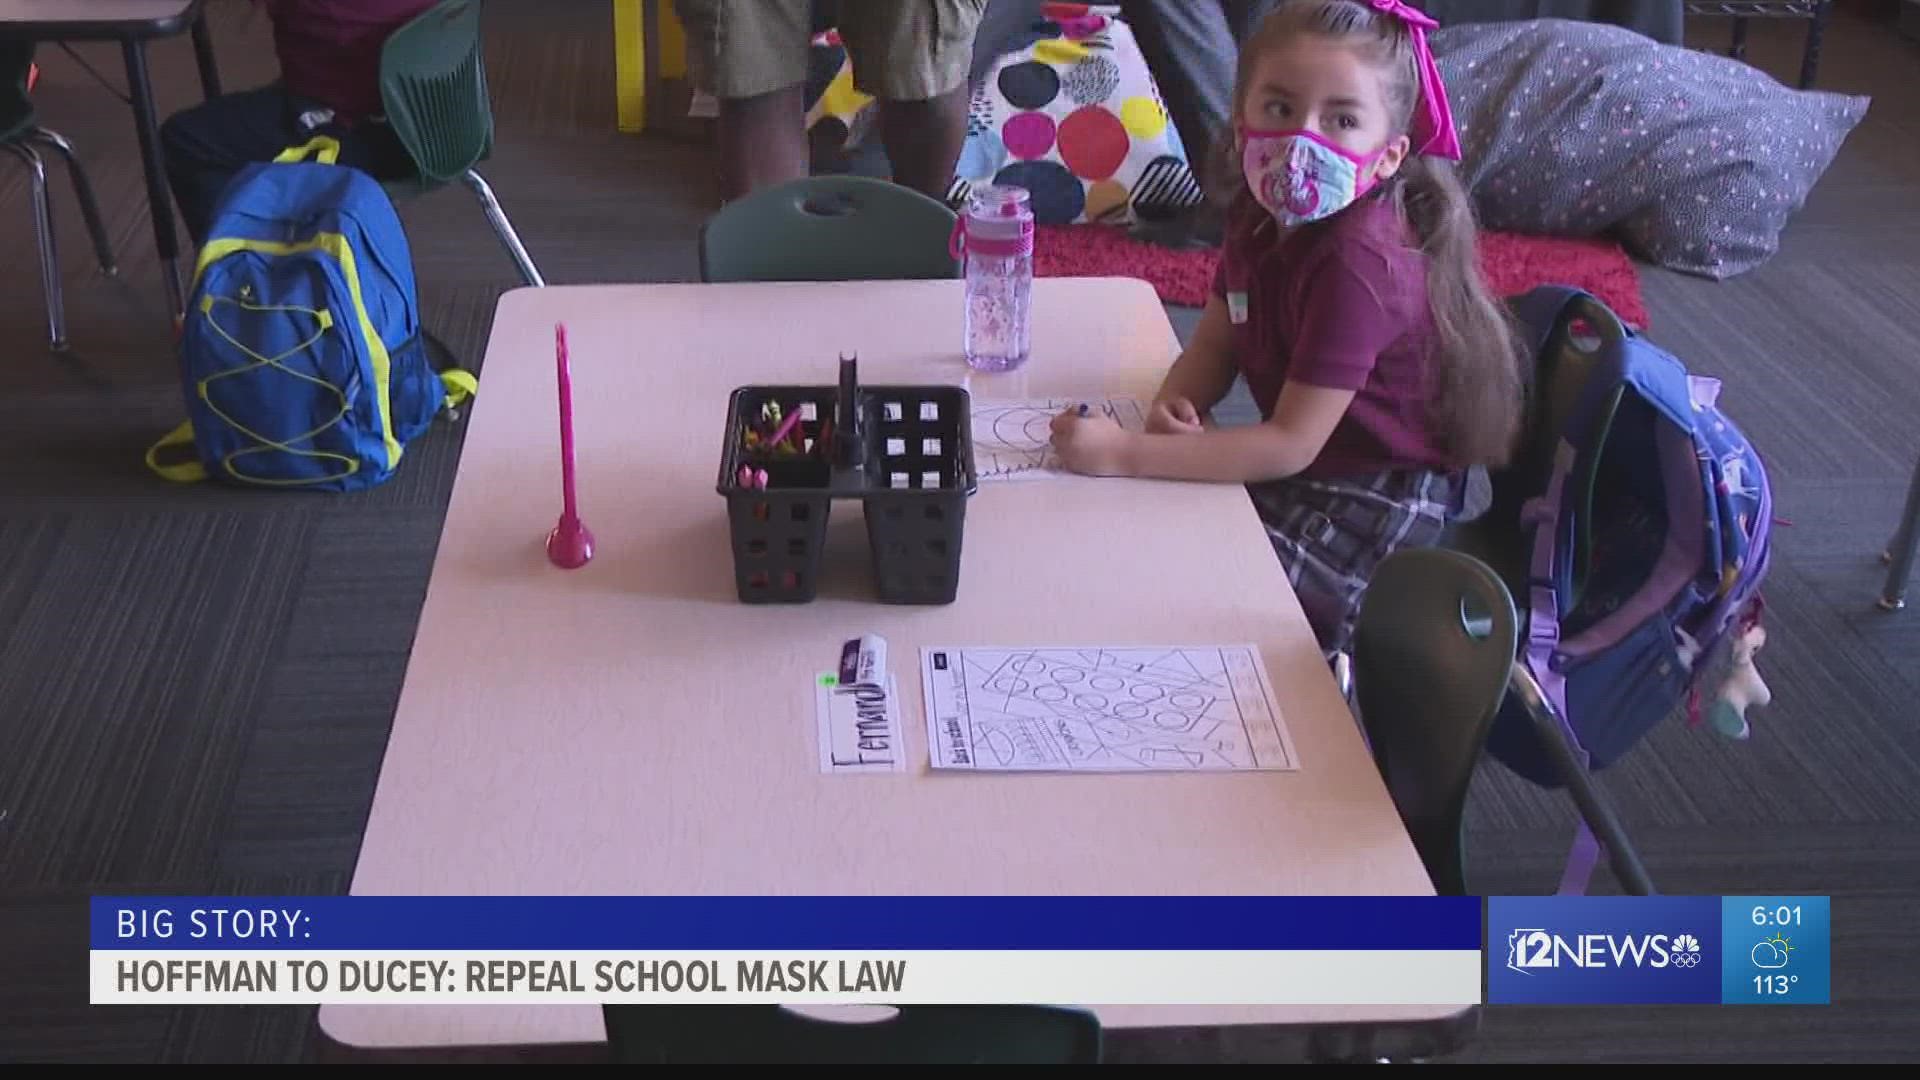 Arizona Gov. Doug Ducey is digging in and refusing to repeal a law banning masks from school classrooms. Superintendent Kathy Hoffman is asking him to reconsider.